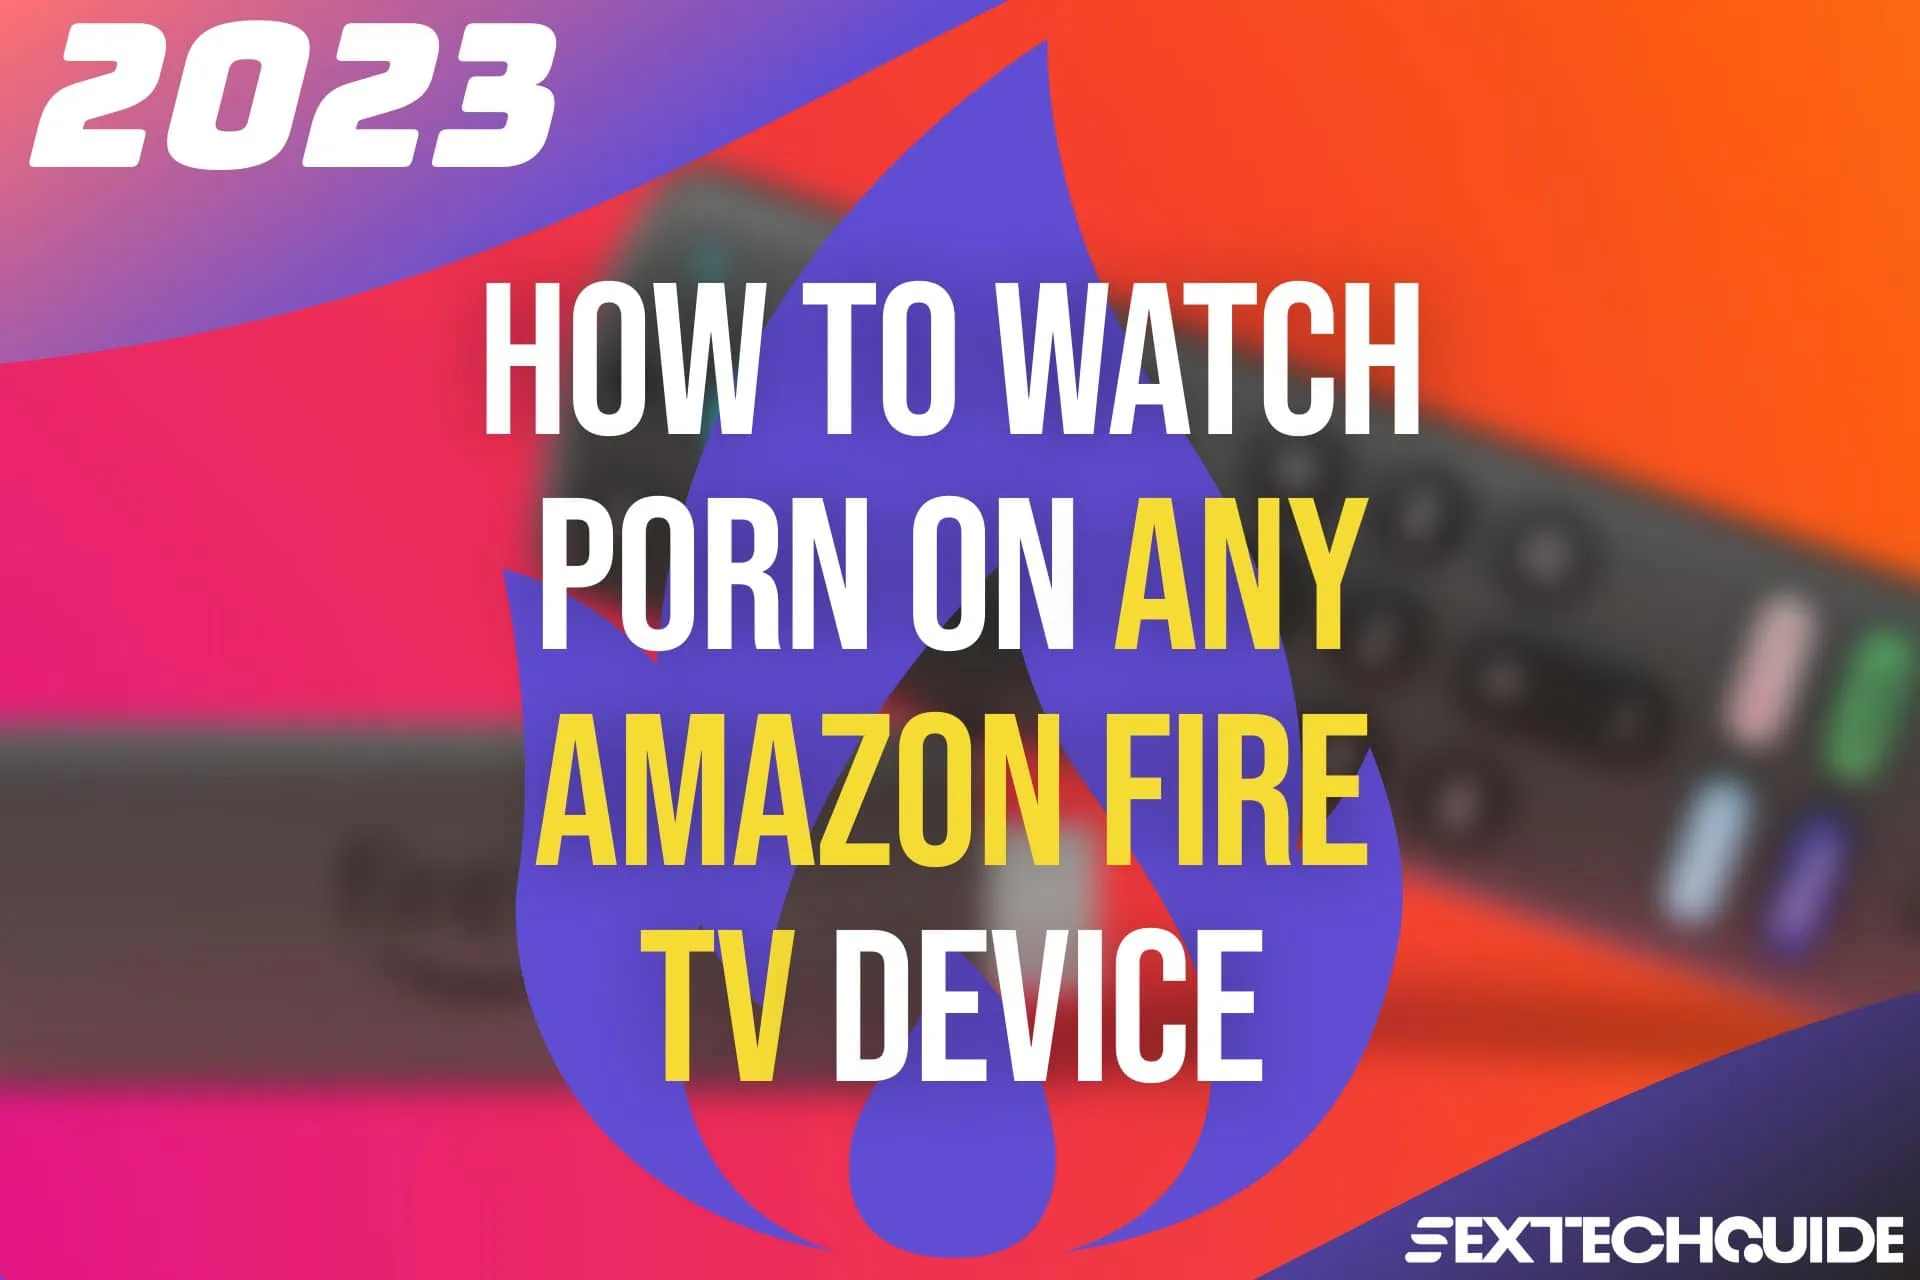 Fire Porn (2023) Find and Watch XXX Videos on Amazon Devices pic